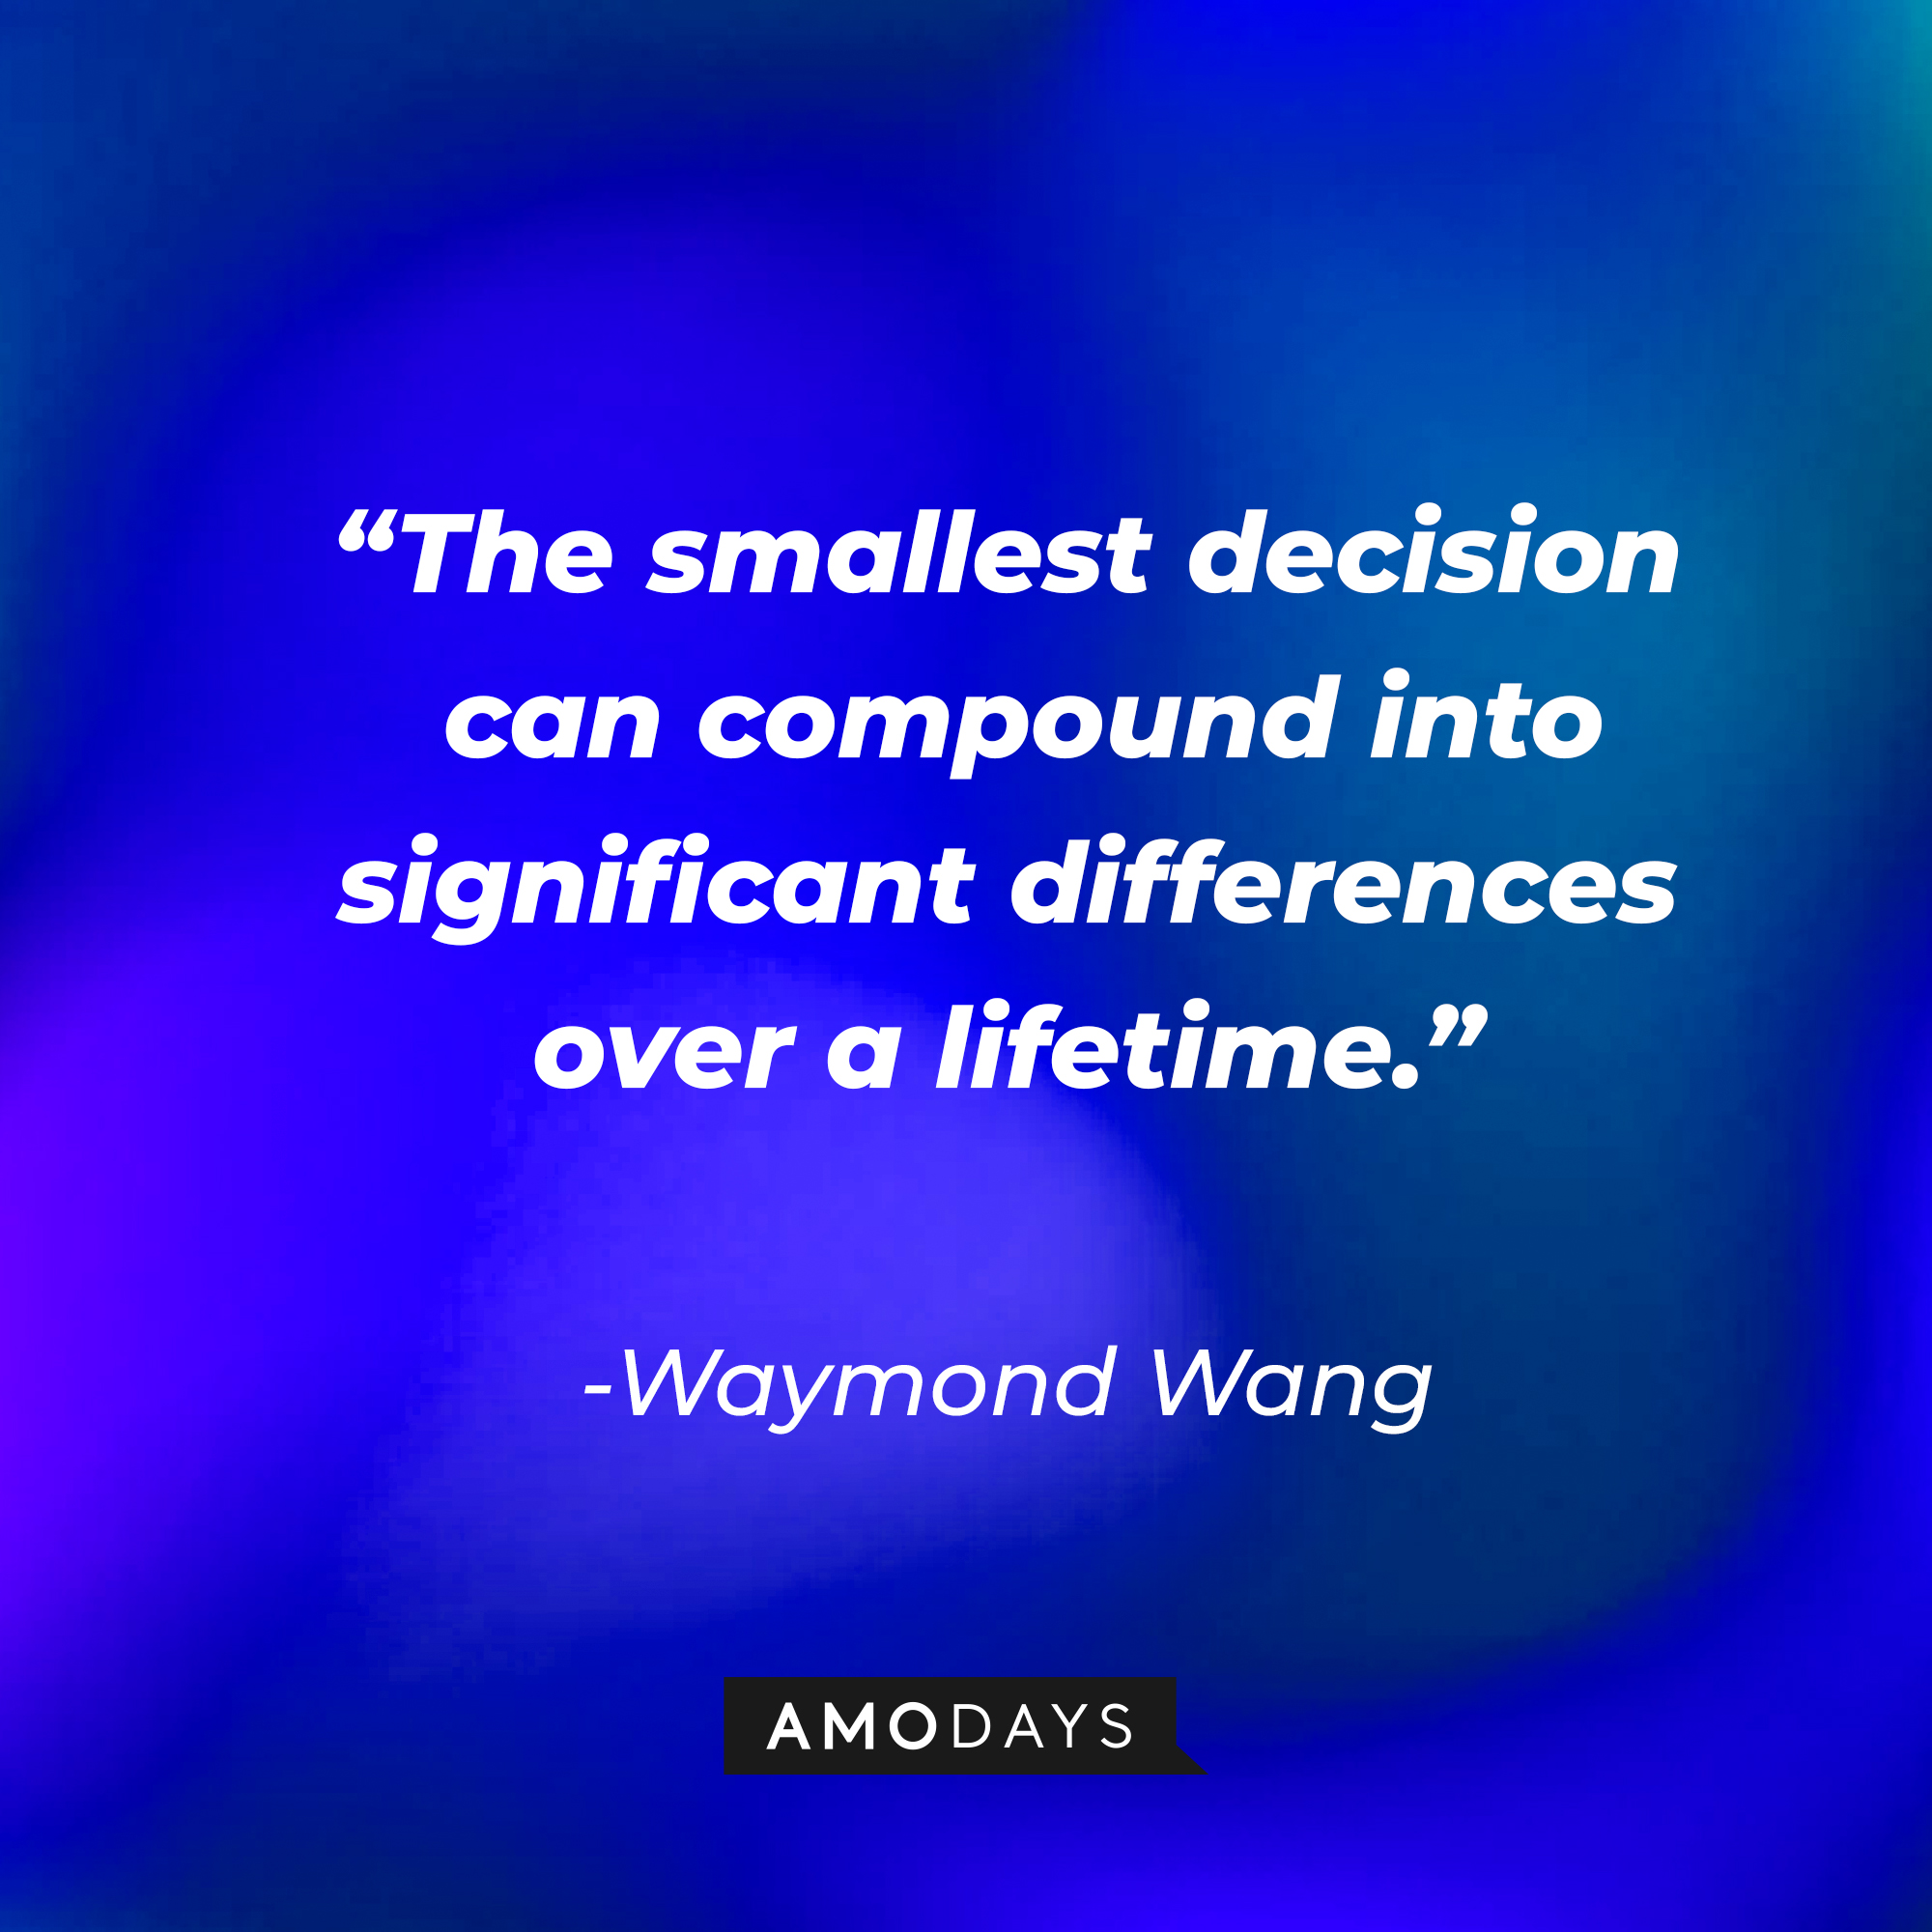 Waymond Wang’s quote: “The smallest decision can compound into significant differences over a lifetime.”  |  Source: AmoDays